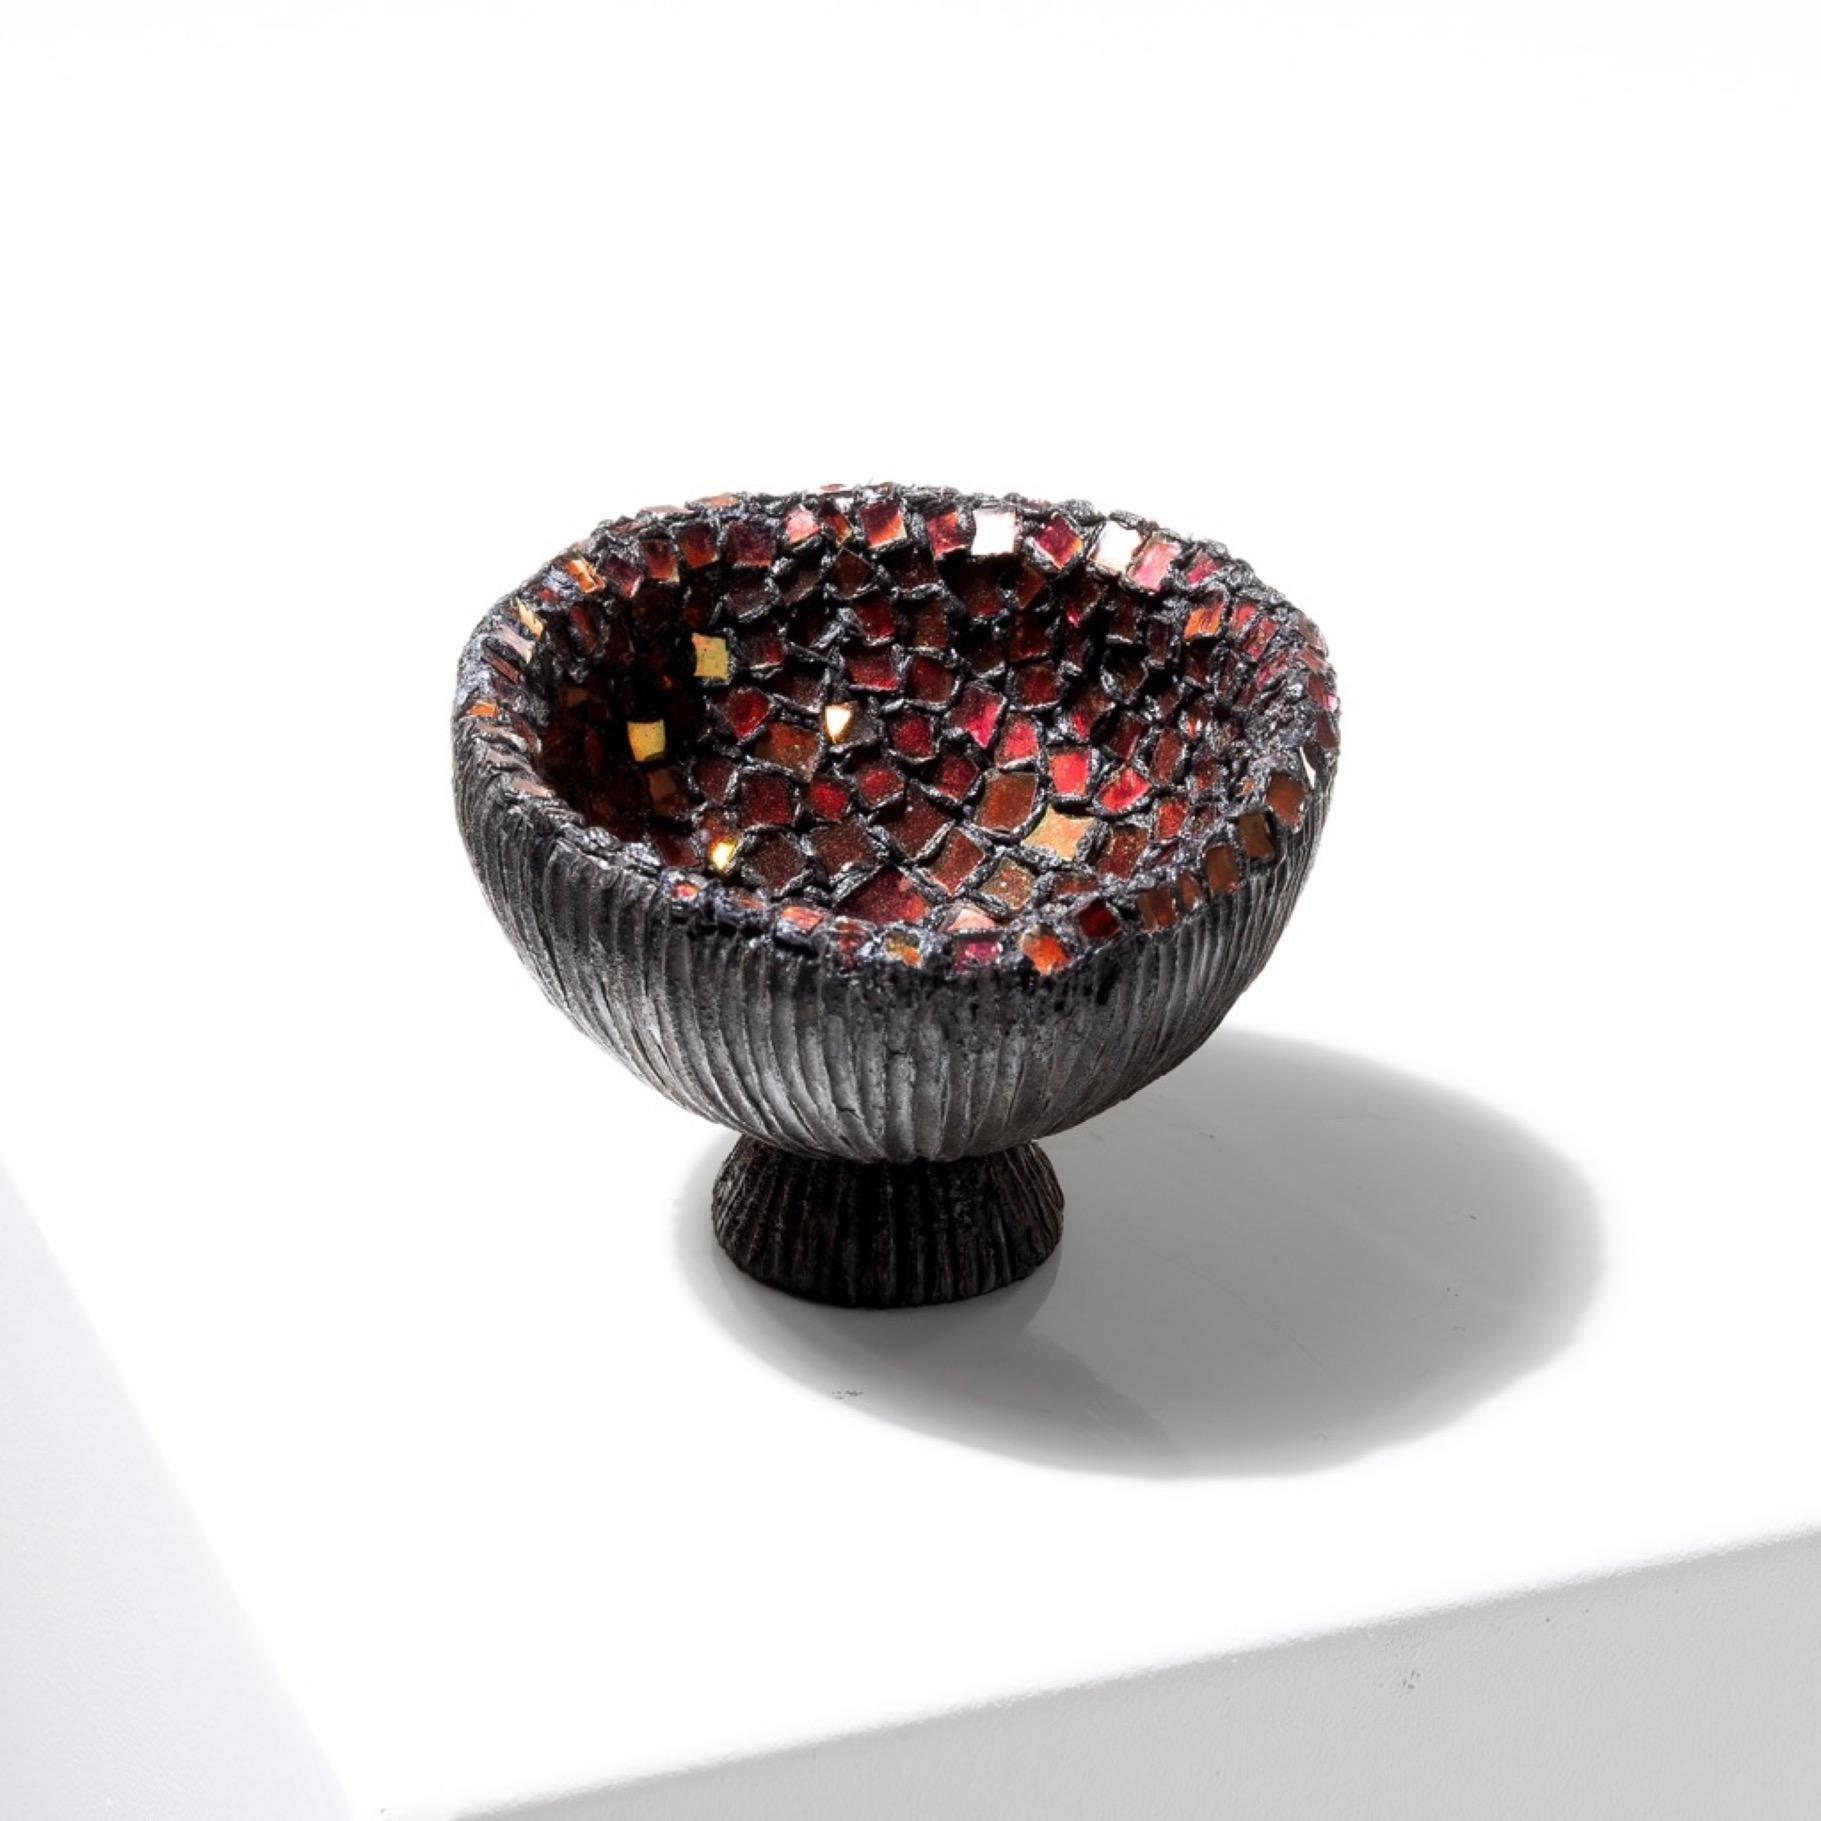 Vide-poches Cup by Line Vautrin – Talosel encrusted with garnet mirrors
Pretty and rare small empty-pocket cup on a pedestal entirely manufactured in black Talosel.
The interior encrusted with small garnet red mirrors.